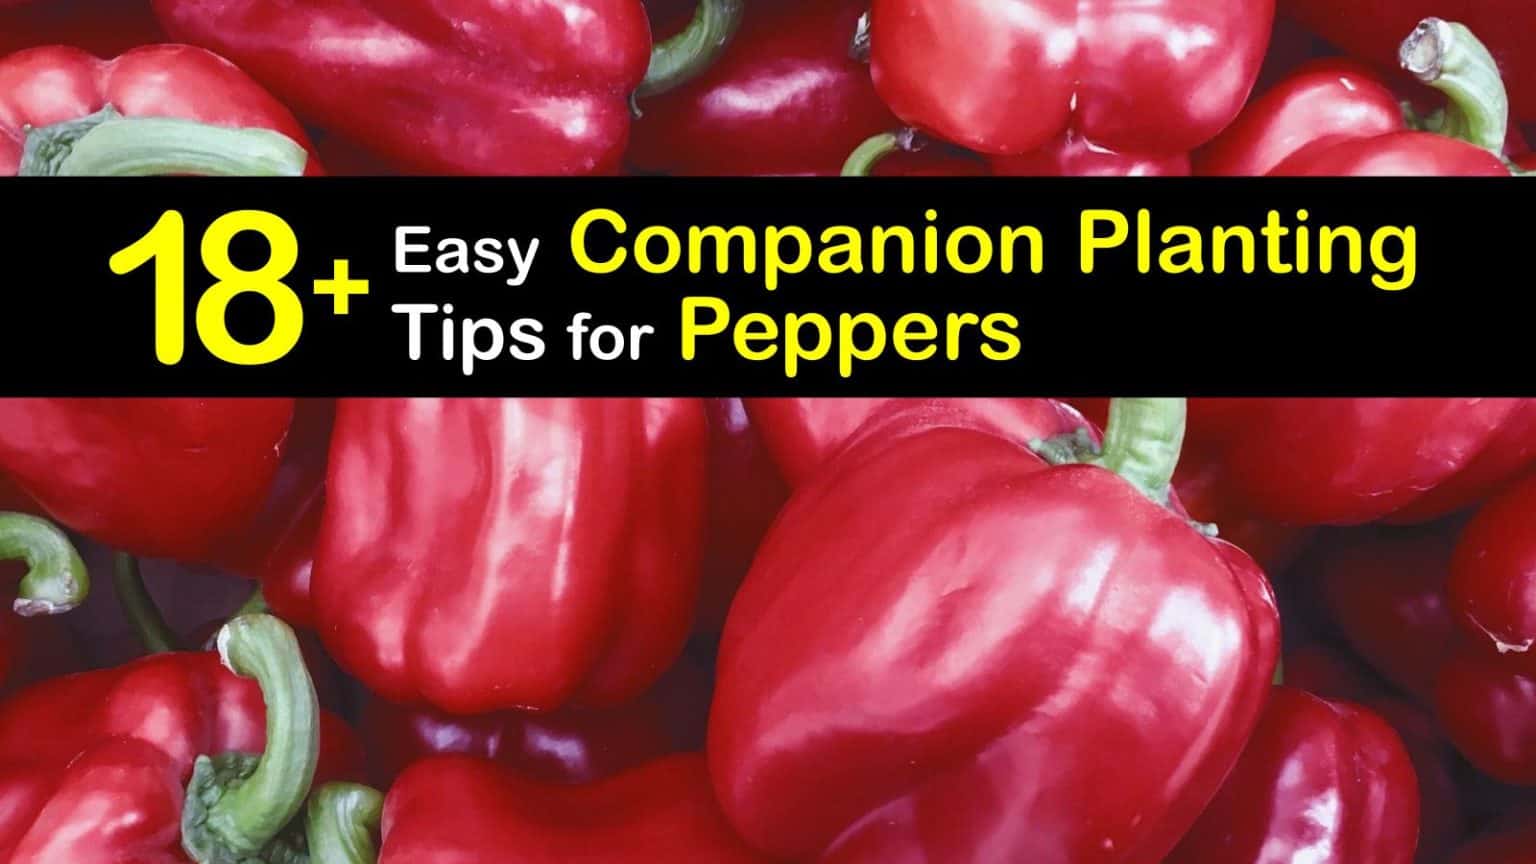 Are tomatoes and peppers companion plants Idea